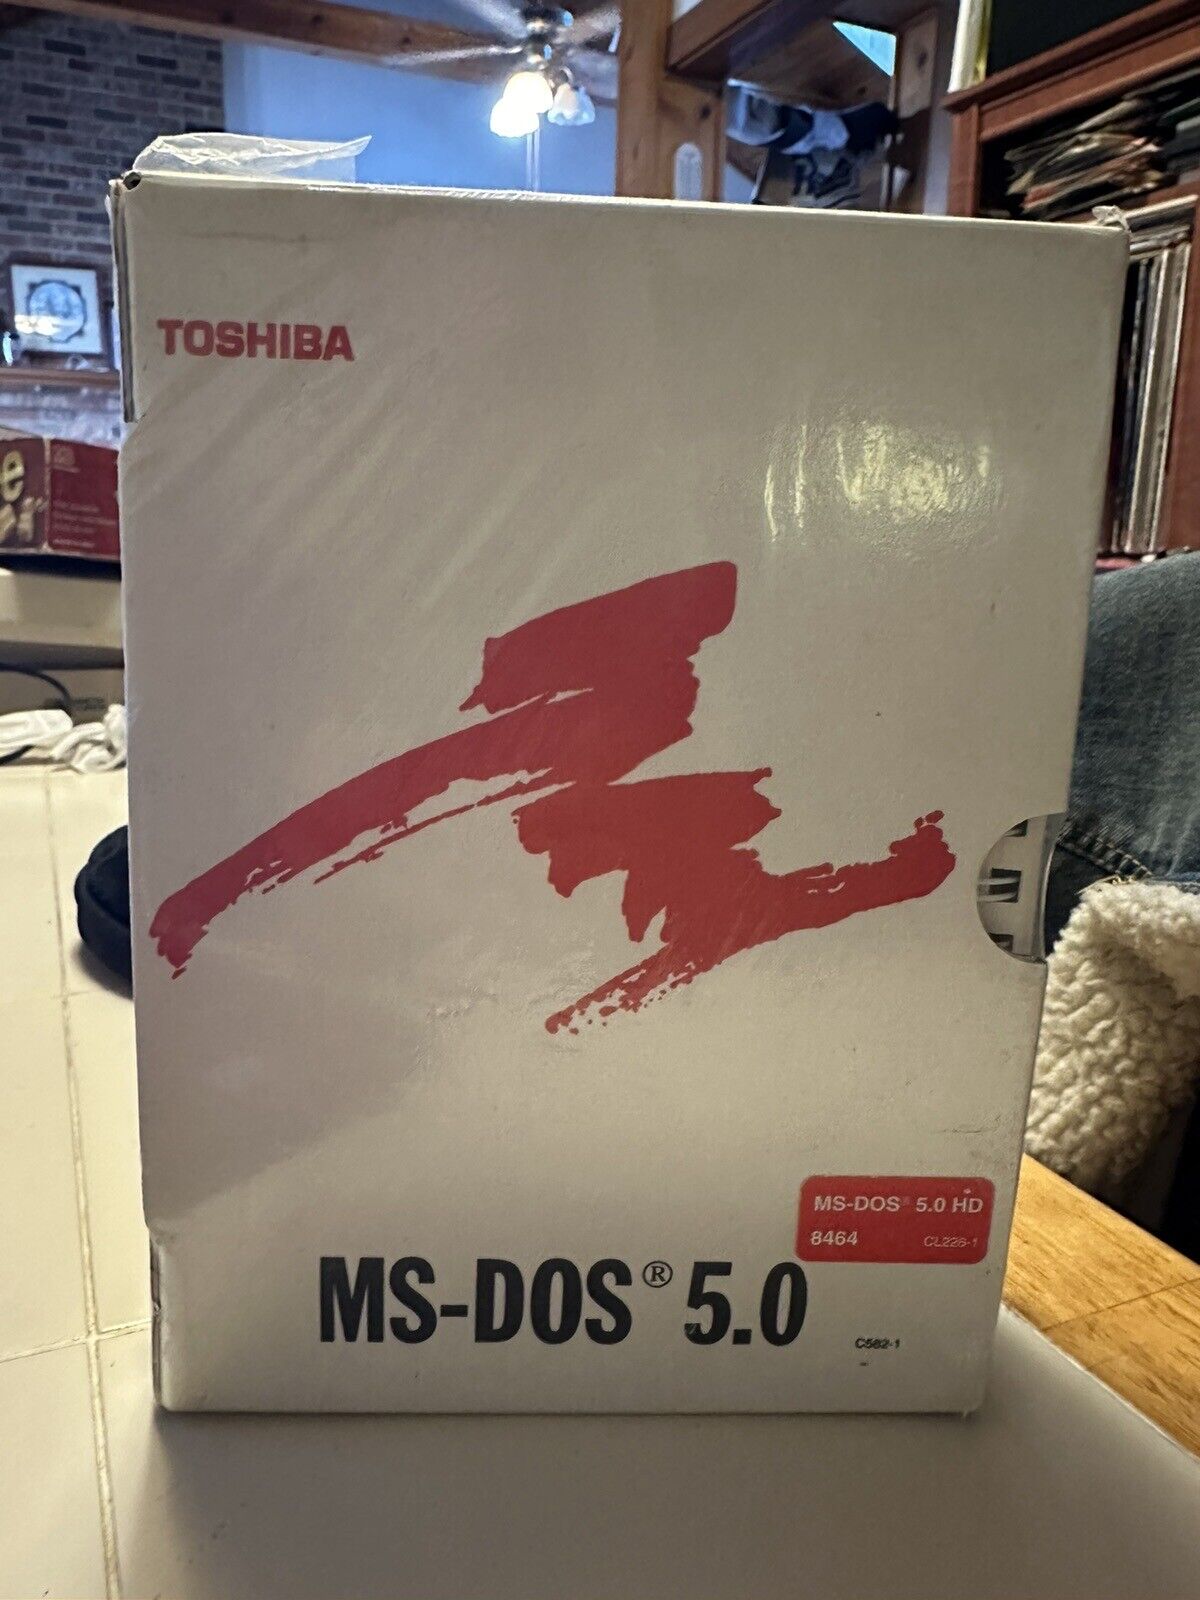 MS-DOS 5.0 Operating System Toshiba Factory Sealed Includes Manuals